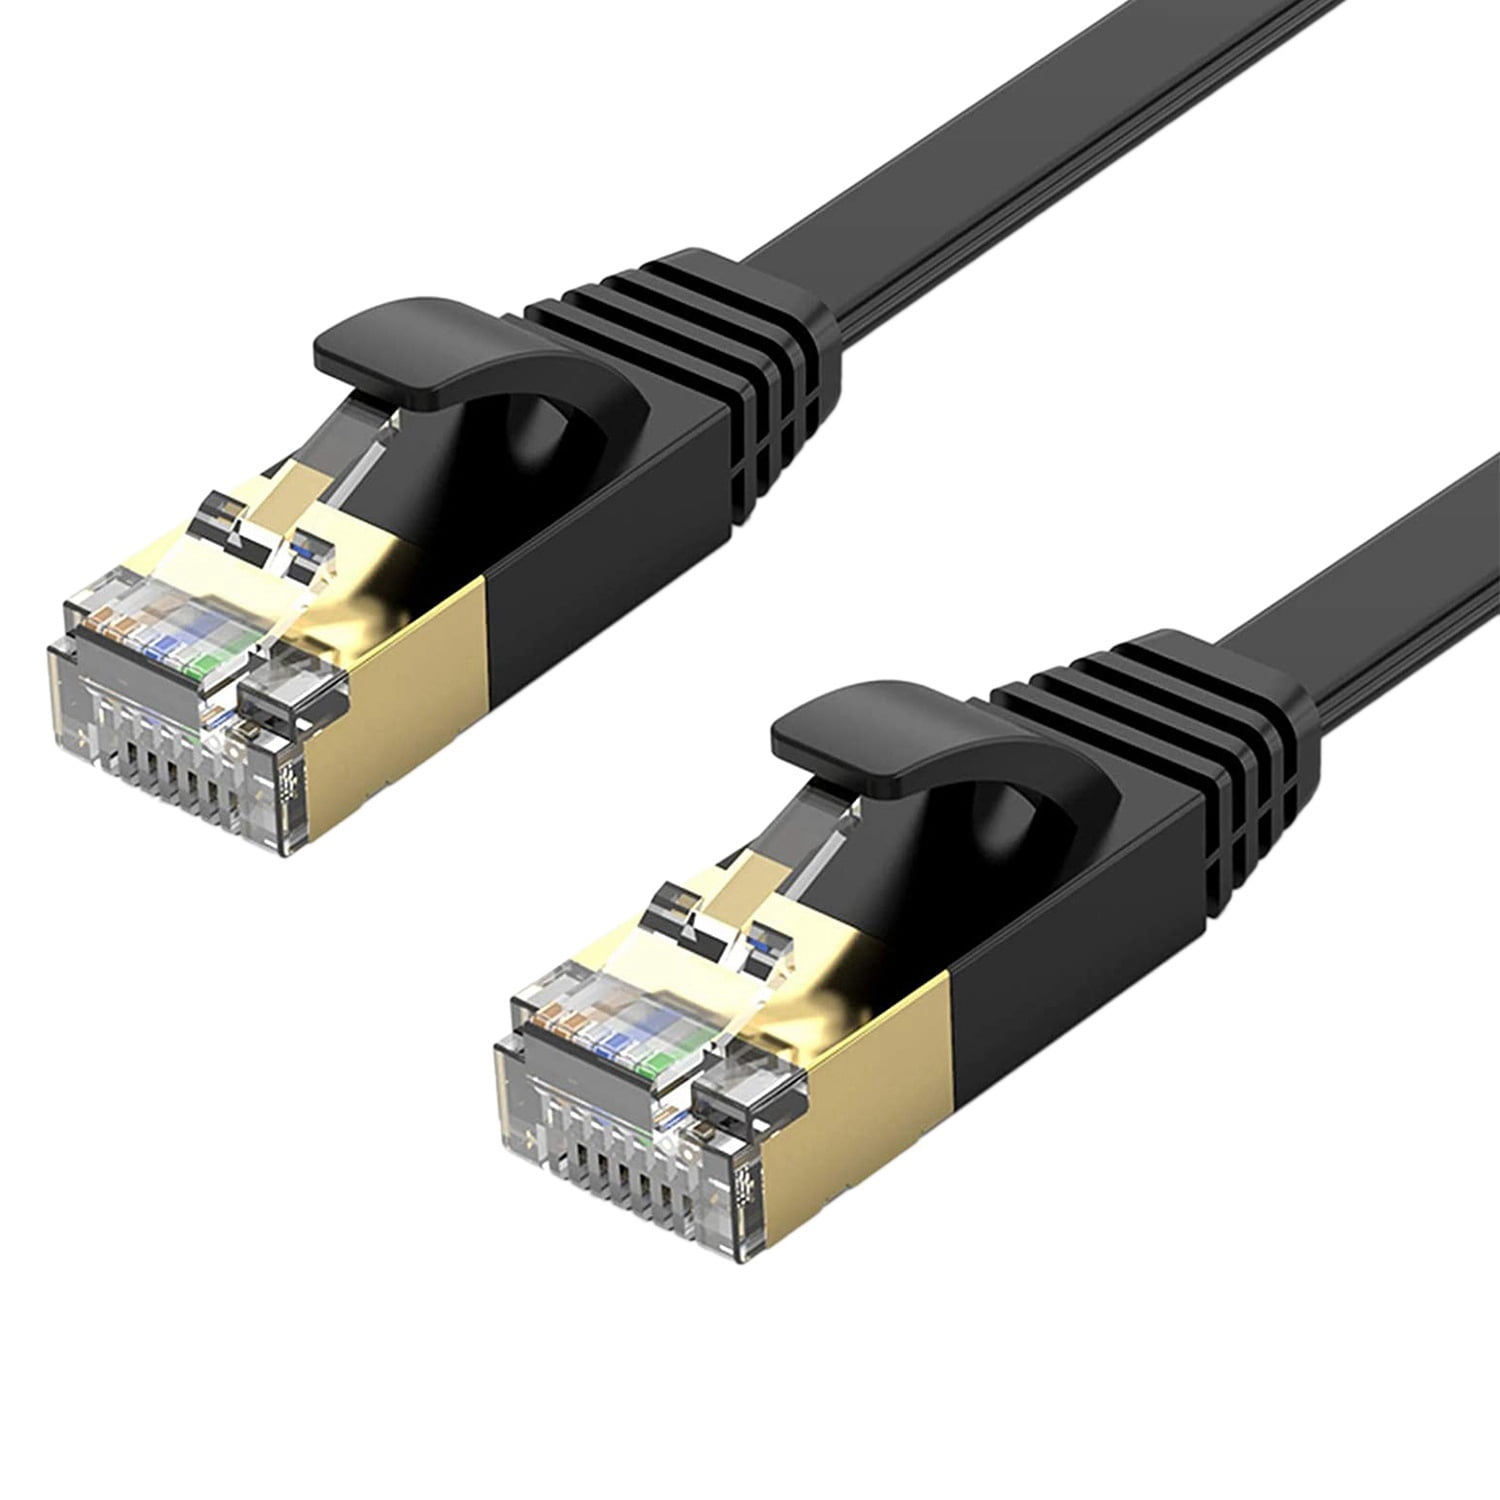 STRONG 20M CAT5e RJ45 ETHERNET LAN NETWORK INTERNET PATCH LEAD CABLE SKY HD PS3 